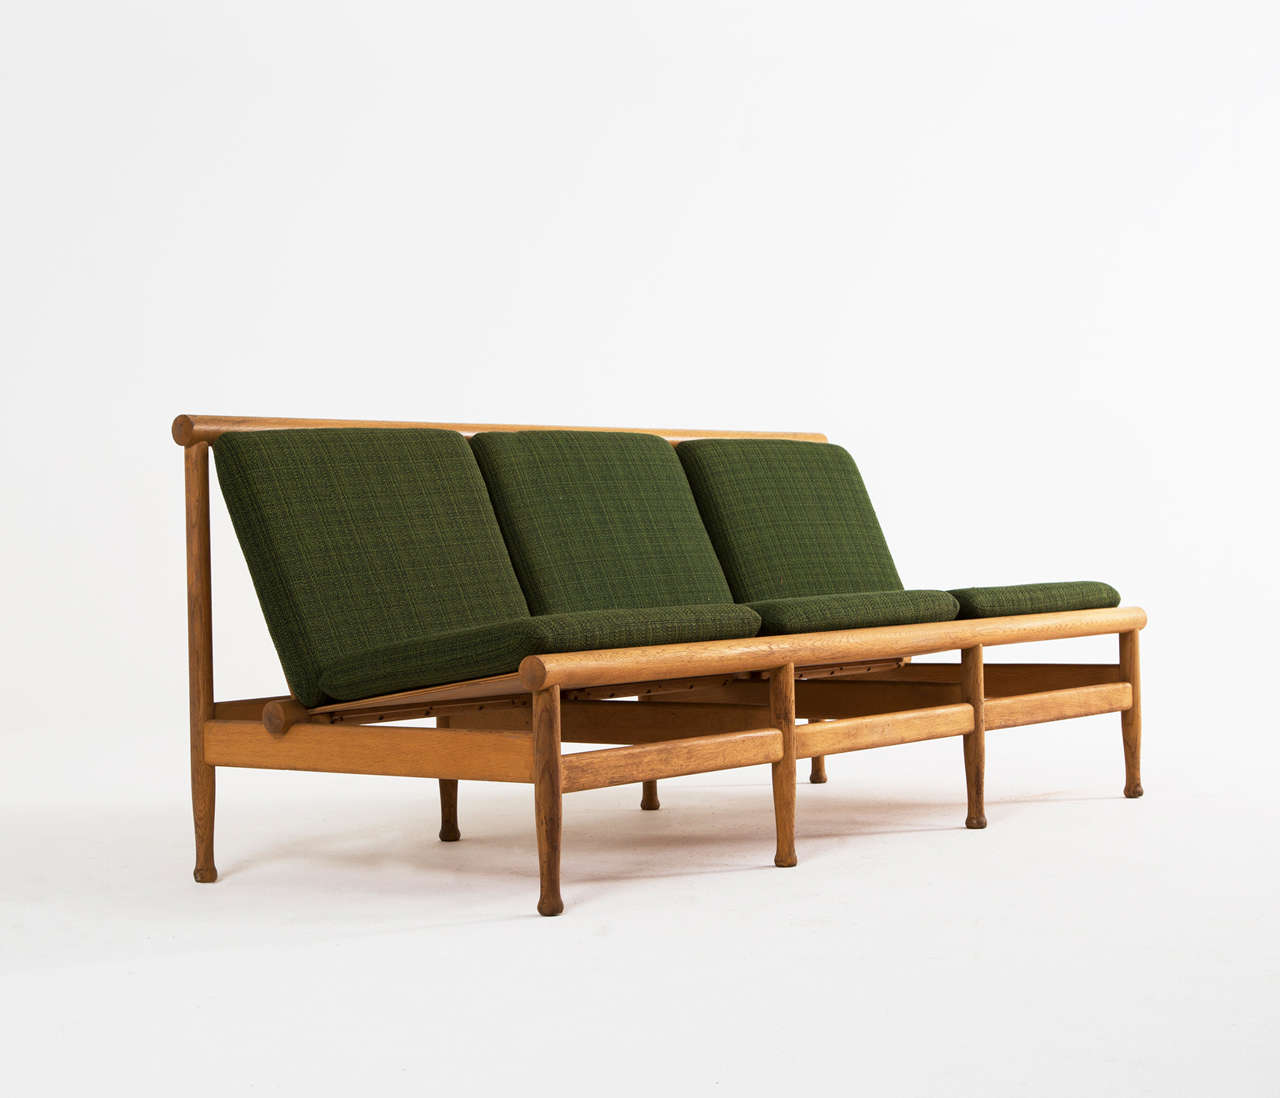 Very well made Danish solid oak three seater sofa, probably by Børge Mogensen, produced at Søborg Møbelfabrik. The sofa consists of a rounded oaken frame with slats forming the seating and the backrest. The cushions are covered with a classic green